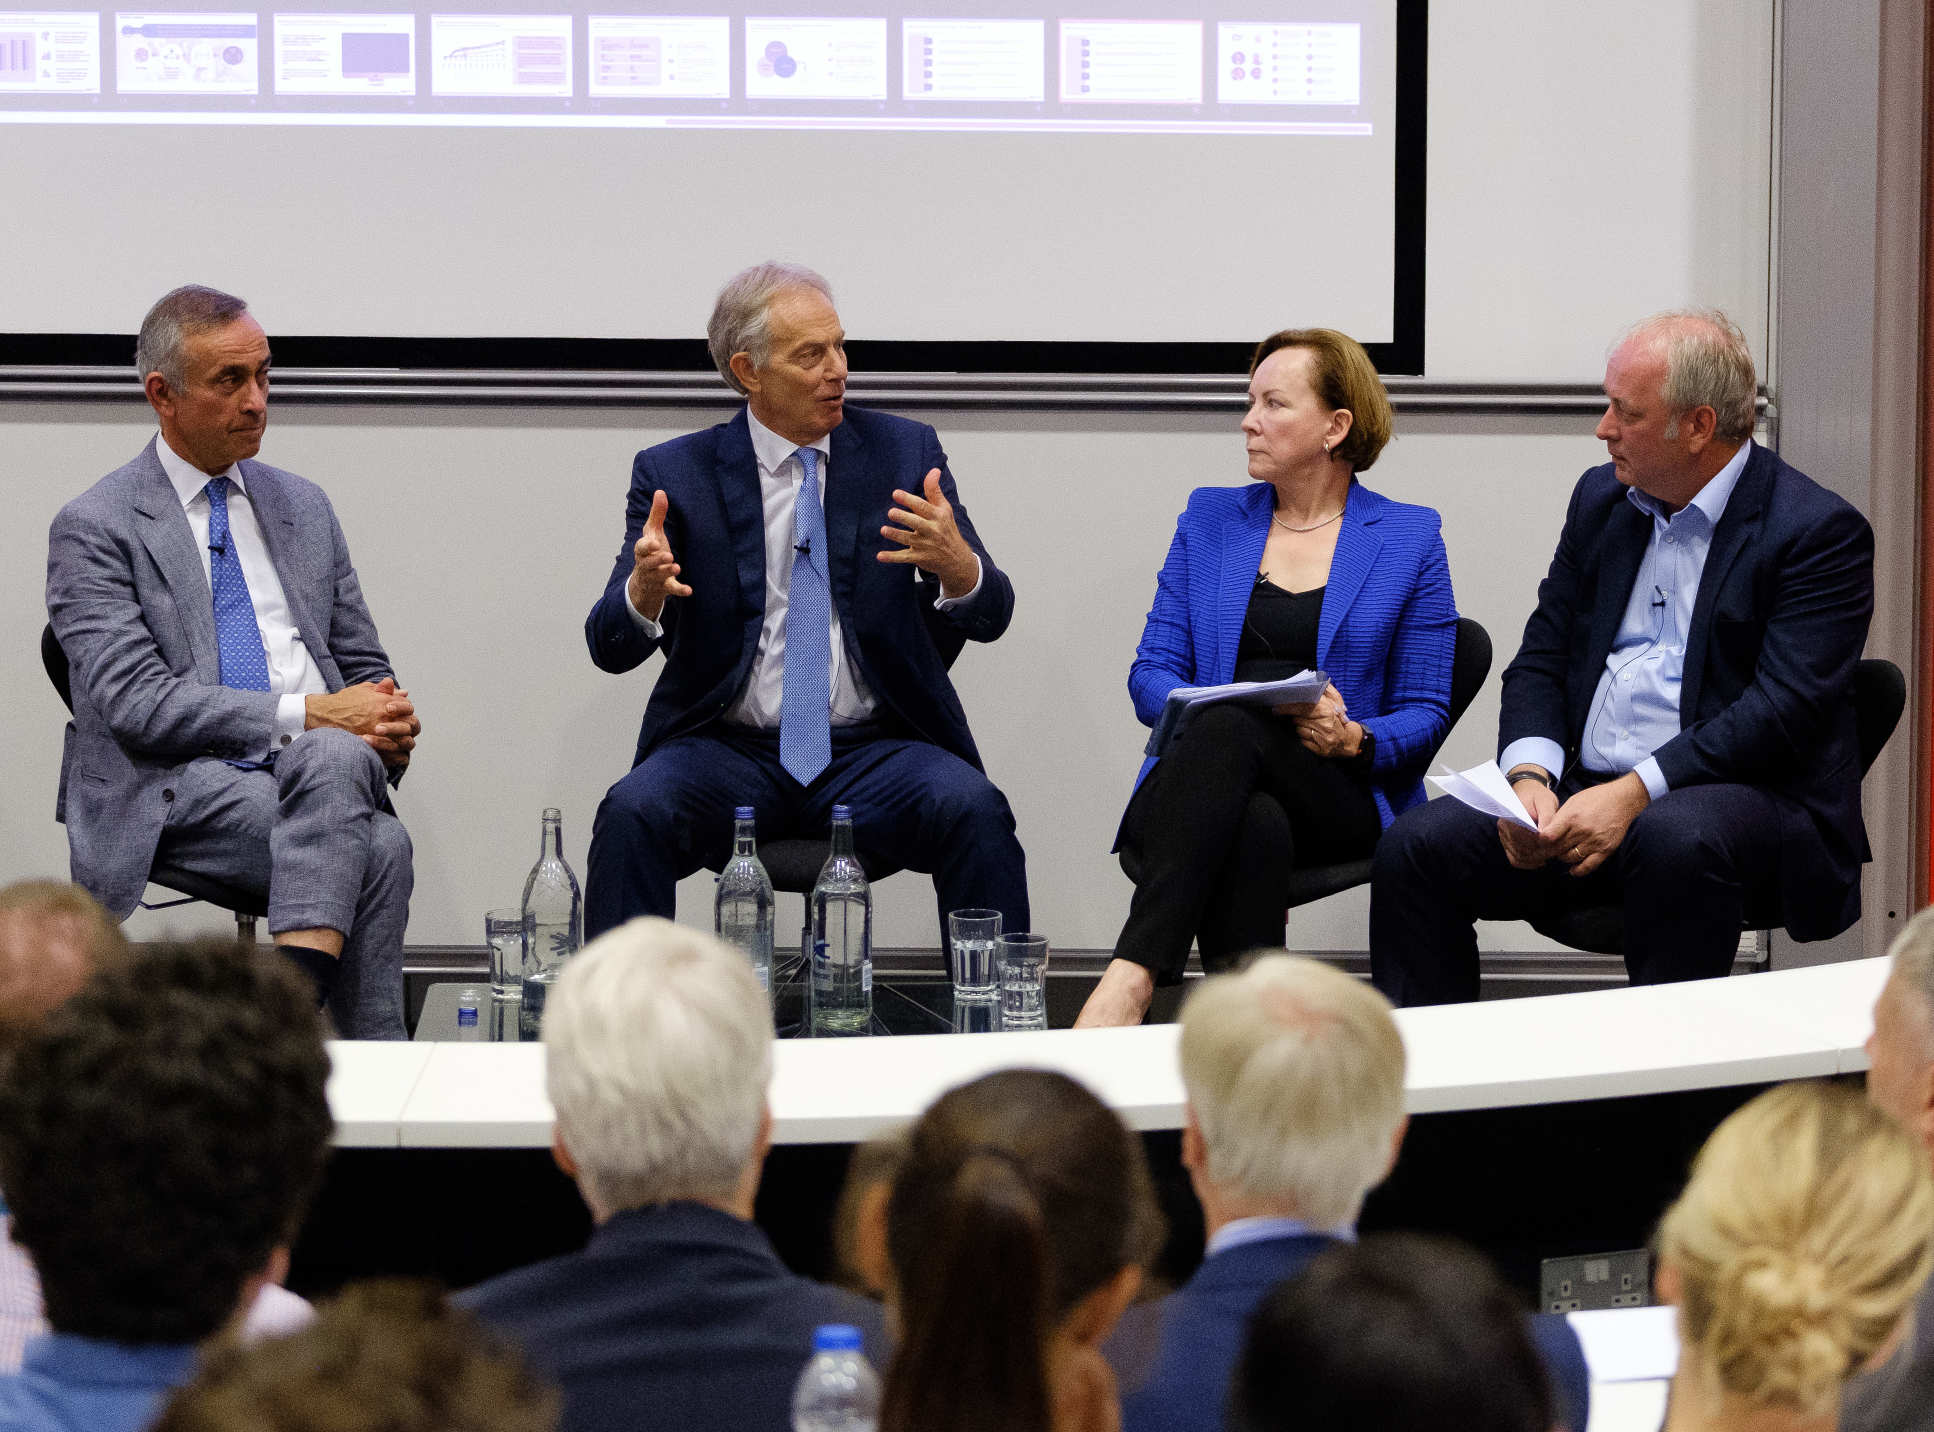 During a panel session, Mr Blair spoke of the need to be “a lot tougher on public health”. 